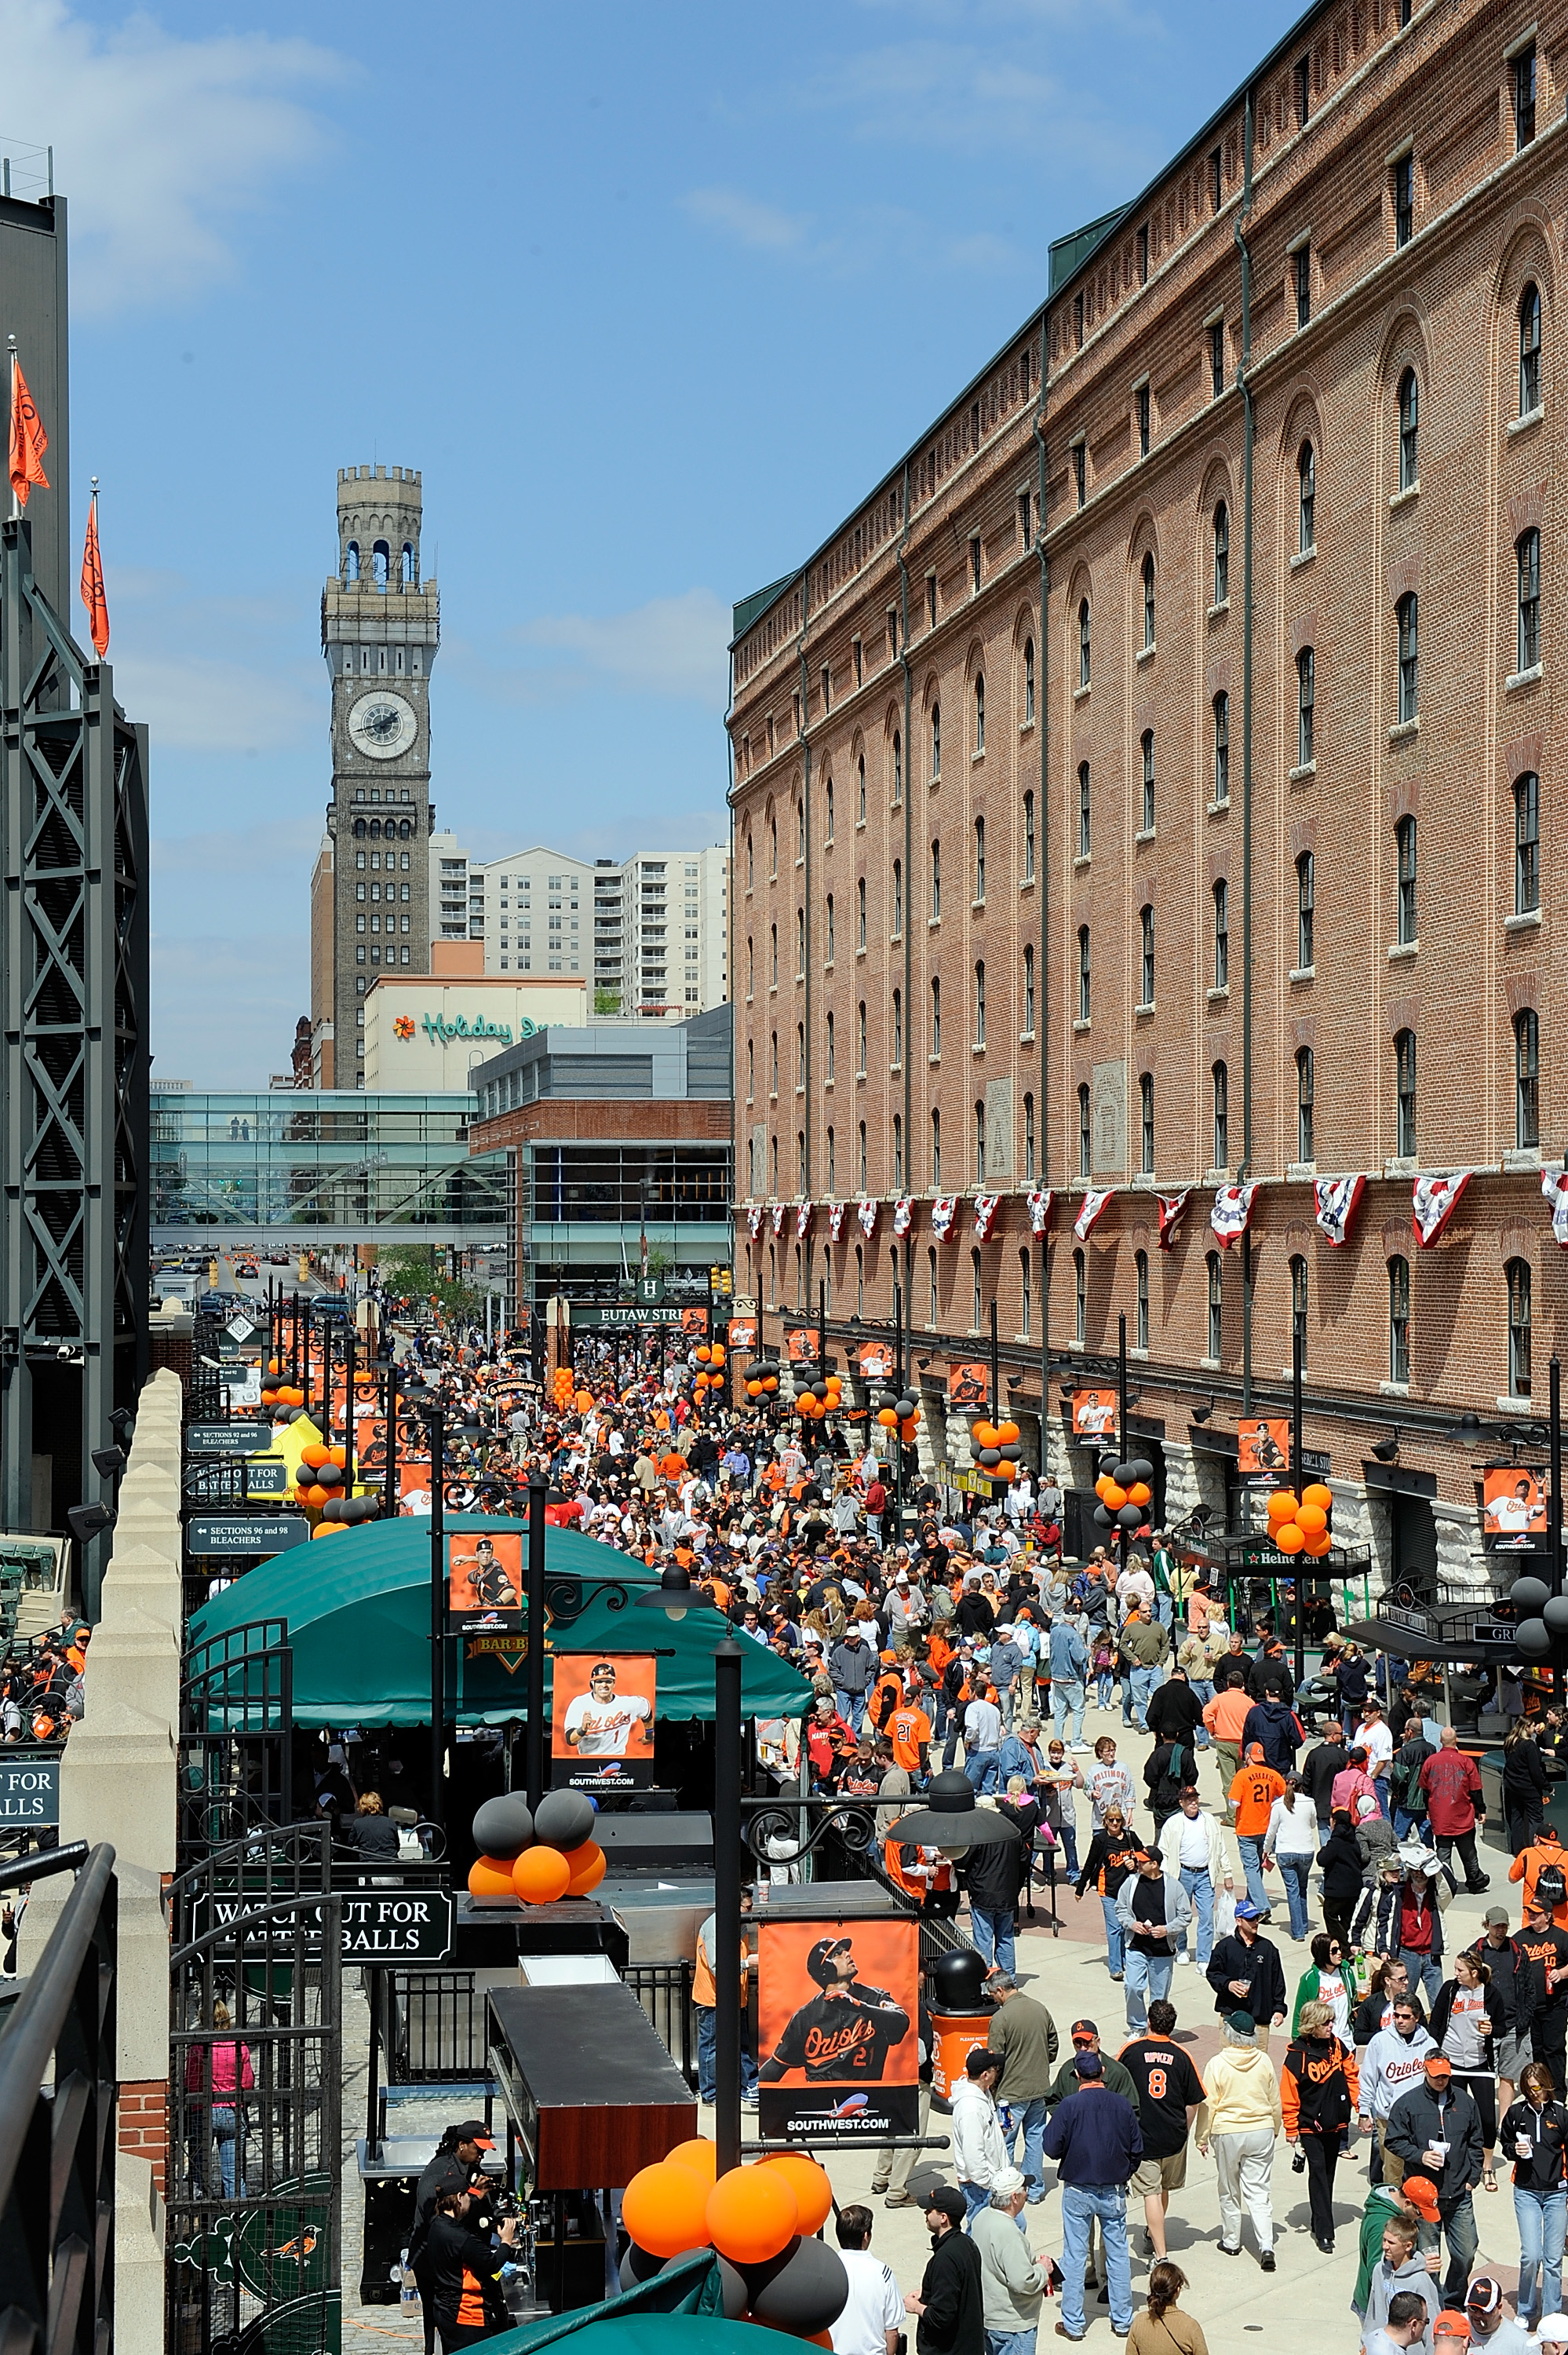 BALTIMORE - APRIL 09:  Fans walk down Eutaw Street before the game between the Baltimore Orioles and the Toronto Blue Jays on Opening Day at Camden Yards on April 9, 2010 in Baltimore, Maryland.  (Photo by Greg Fiume/Getty Images)